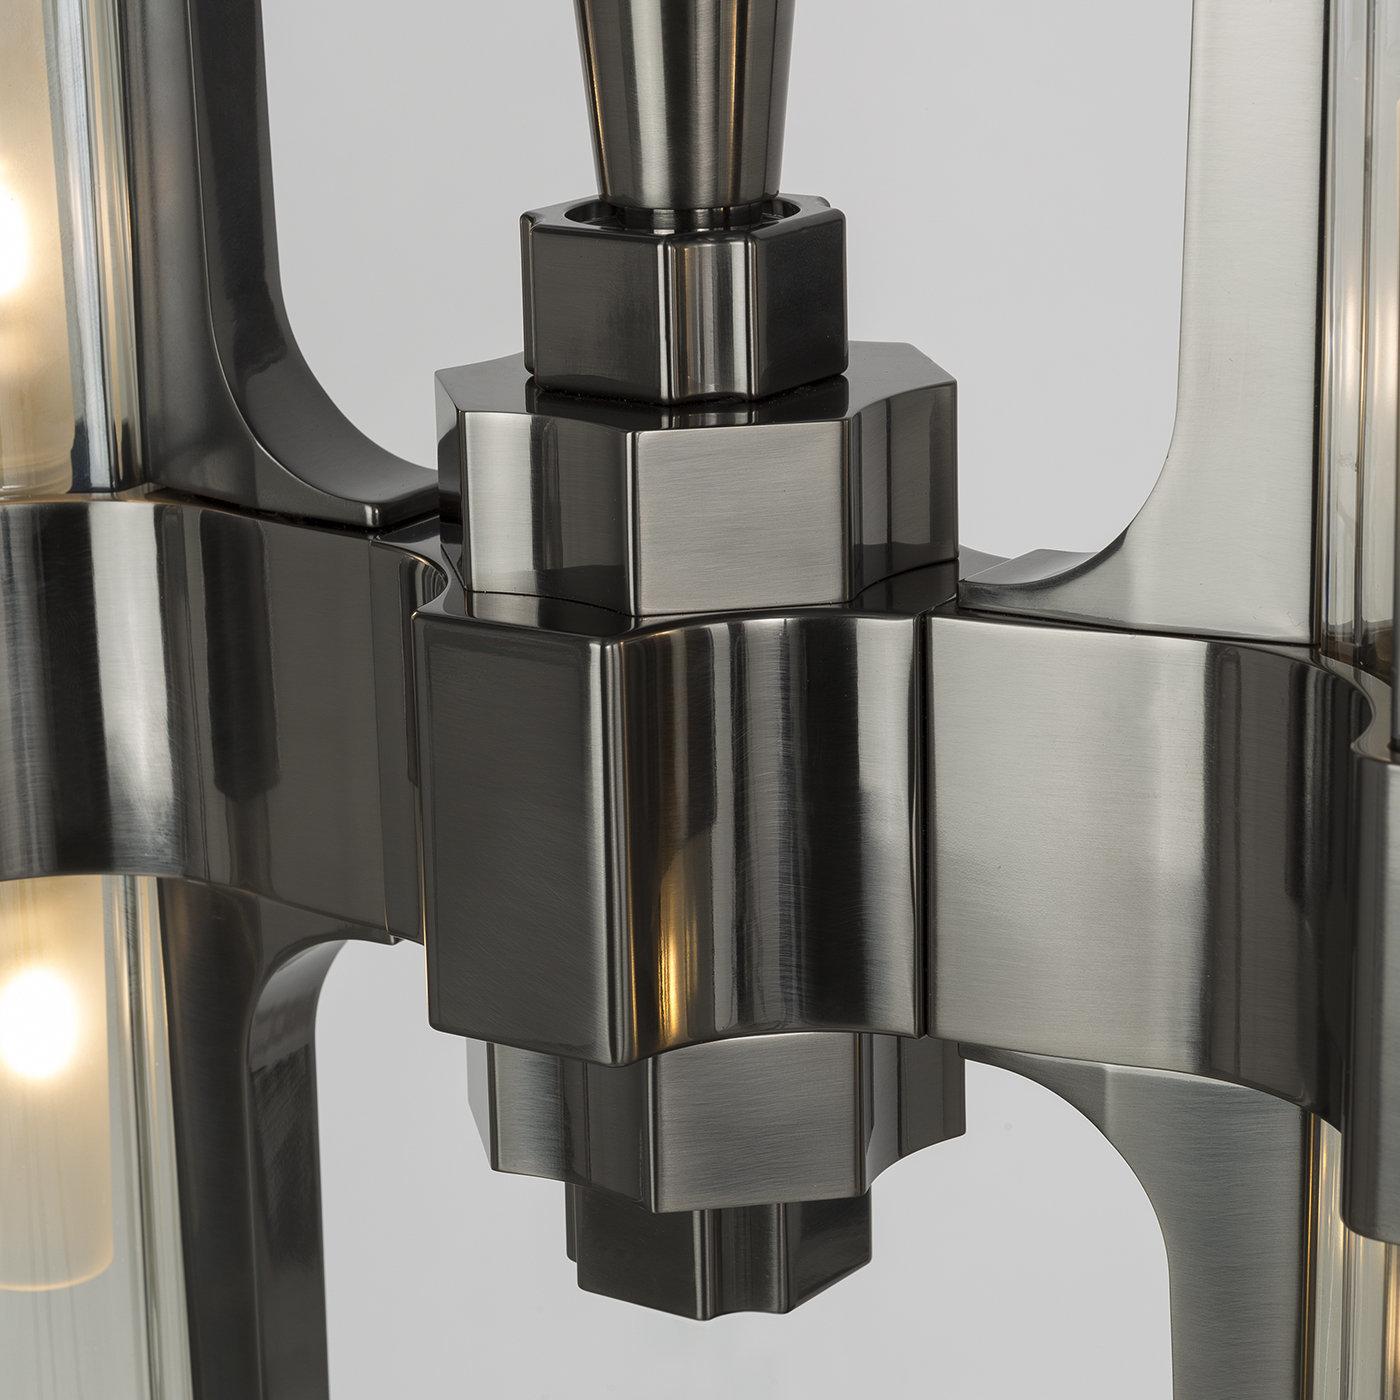 Make a statement with this modern pendant light fixture, part of the Eterea collection. The fixture is in a metal structure with a black nickel finish that holds two transparent crystal shades with metal accents. This piece's particularity is that